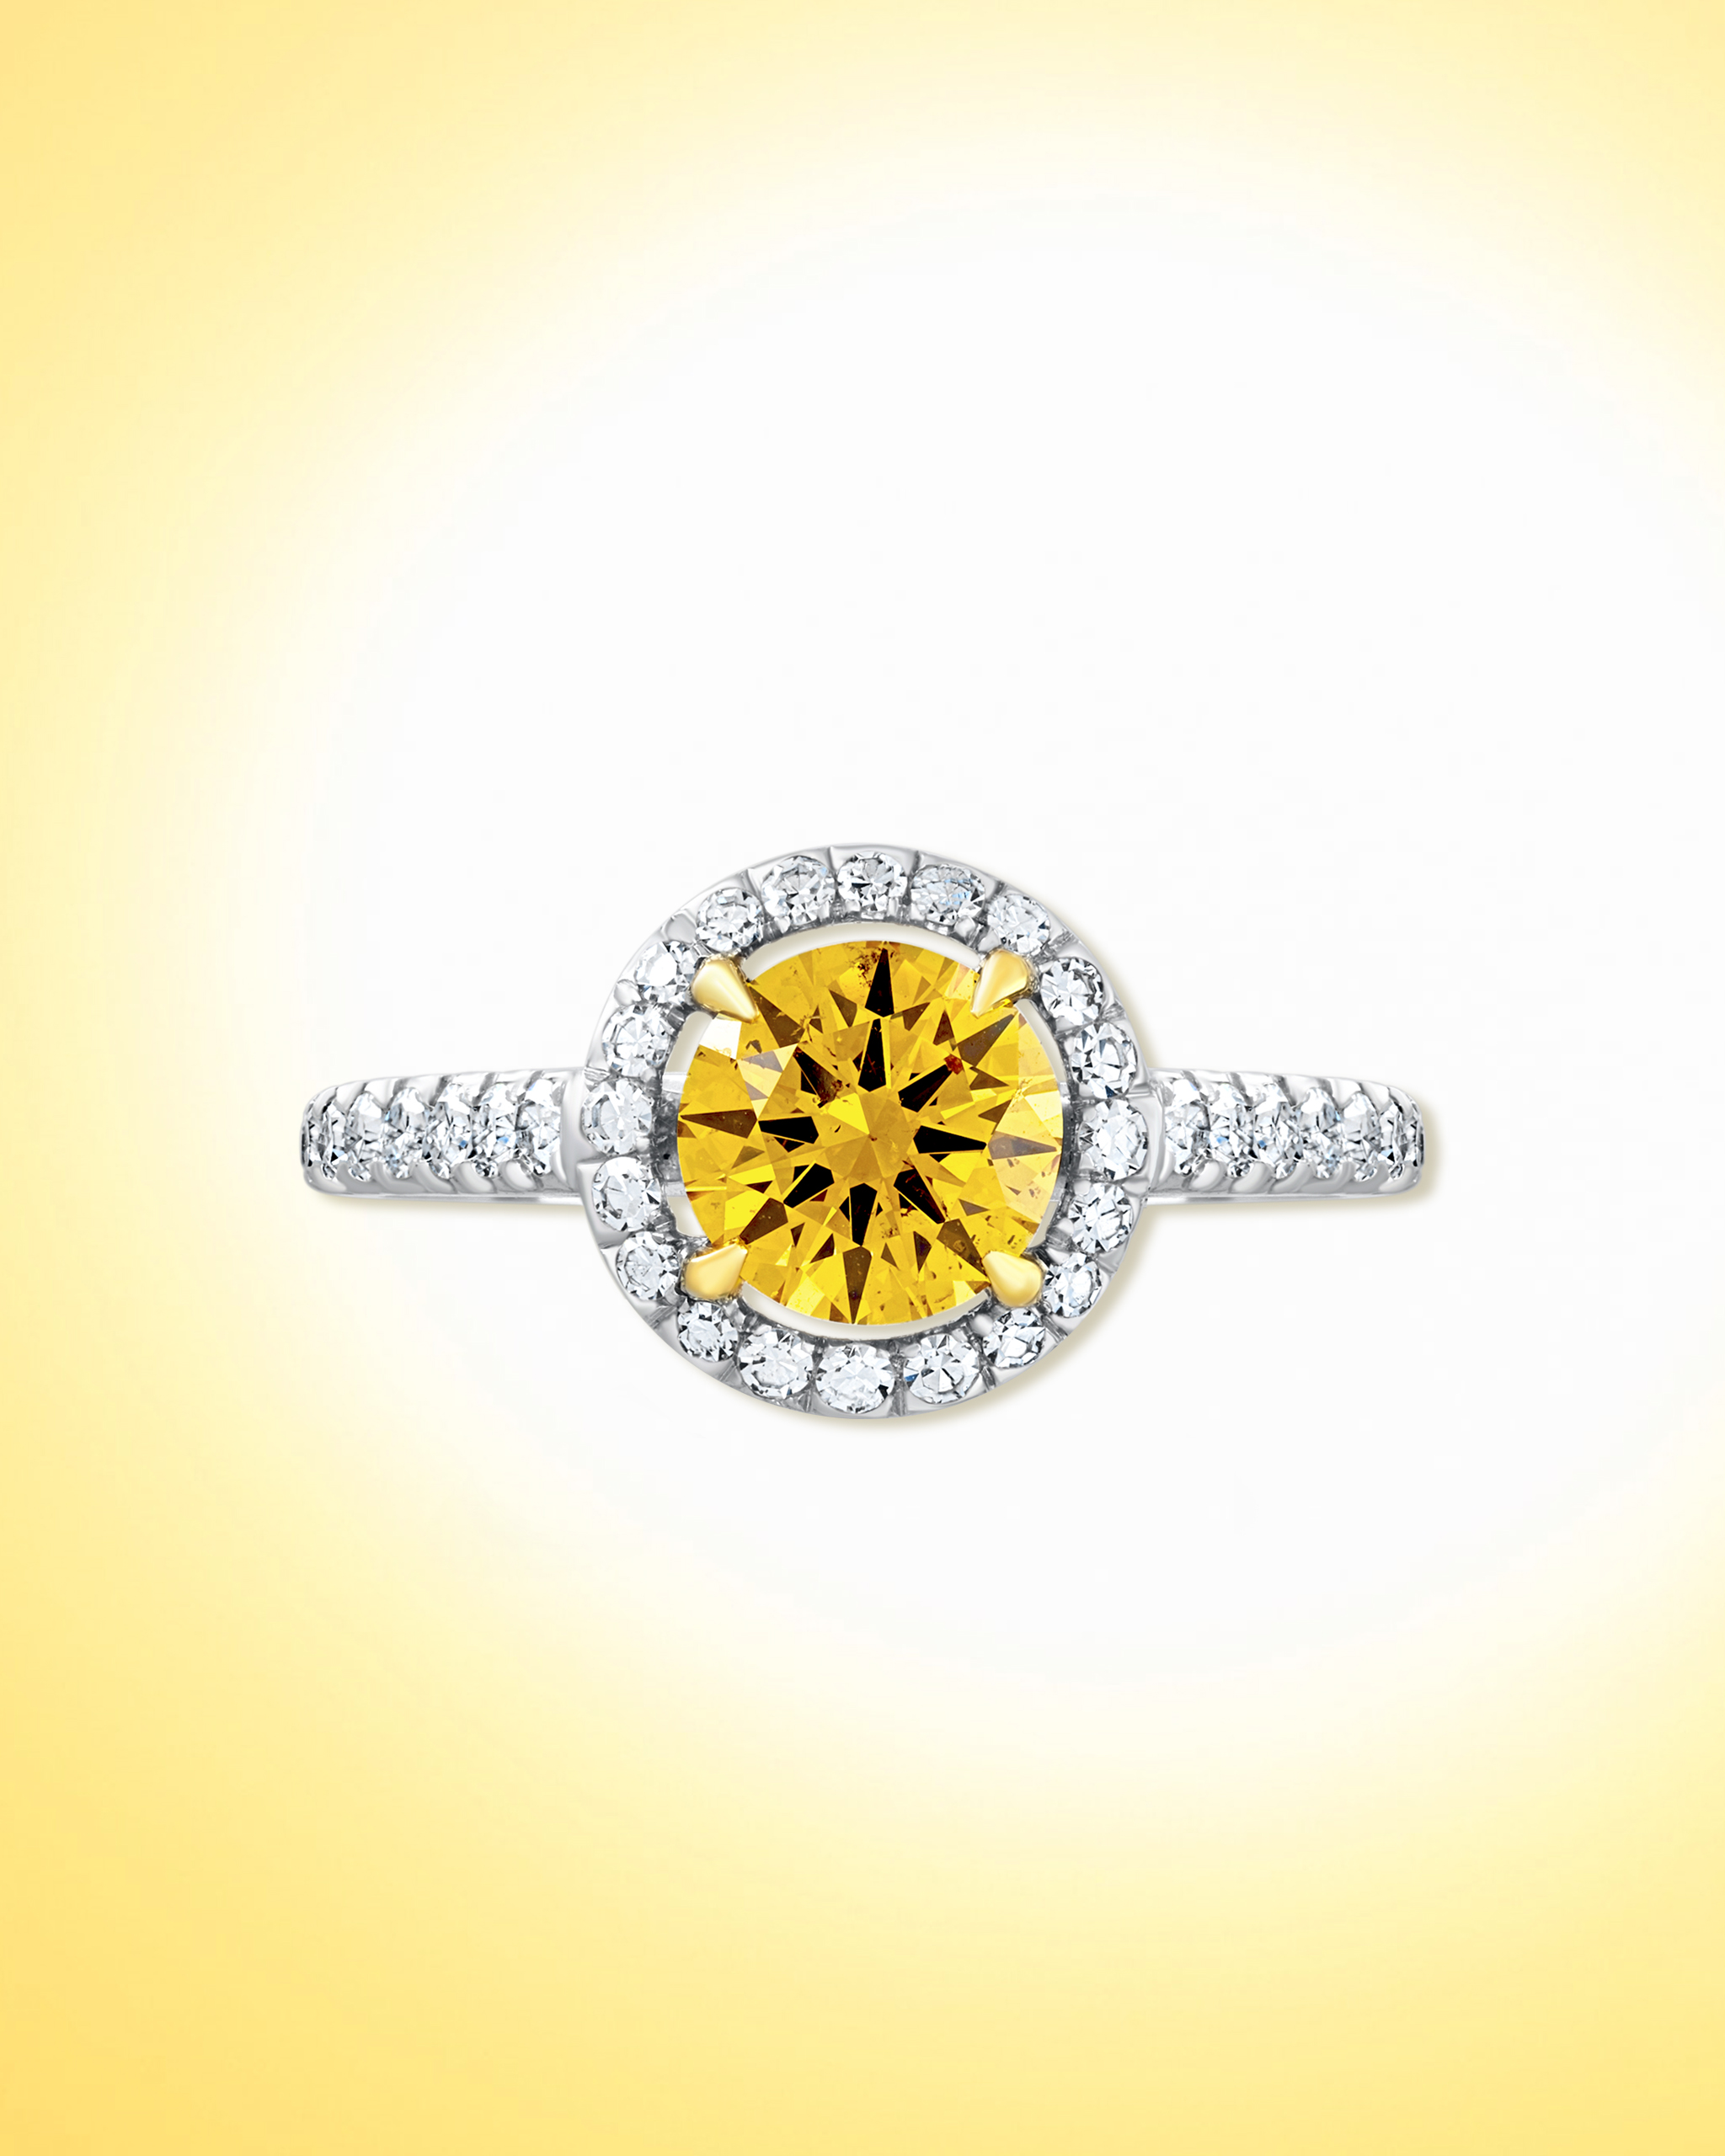 Round cut yellow diamond ring haloed by white pave diamonds on a platinum band from David Morris